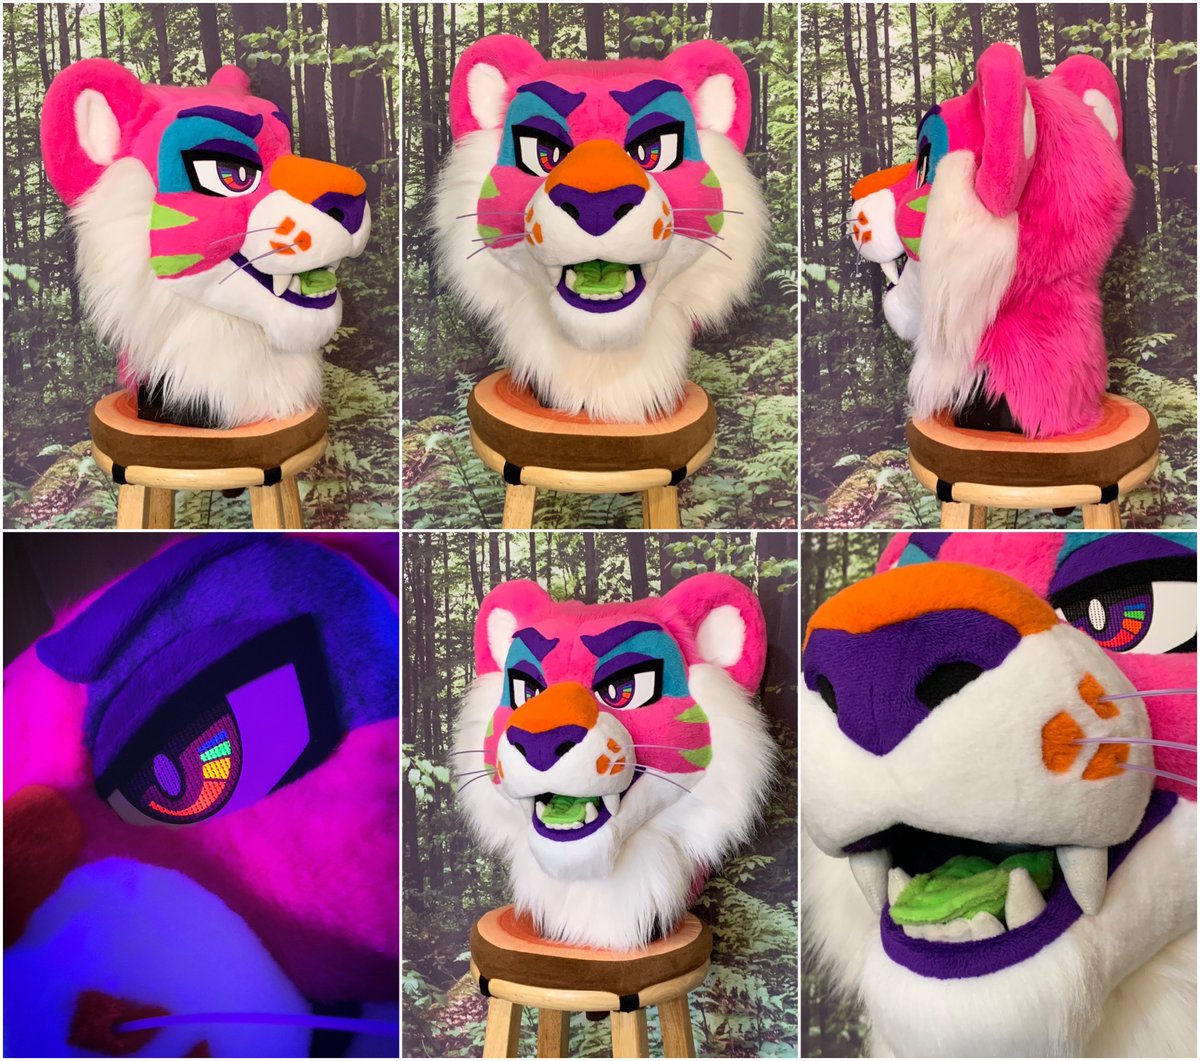 Here’s his head photos, showing off his UV eyes too!! I got to try some things with this head refurb that I don’t normally do, it was a lot of fun to experiment with 😸